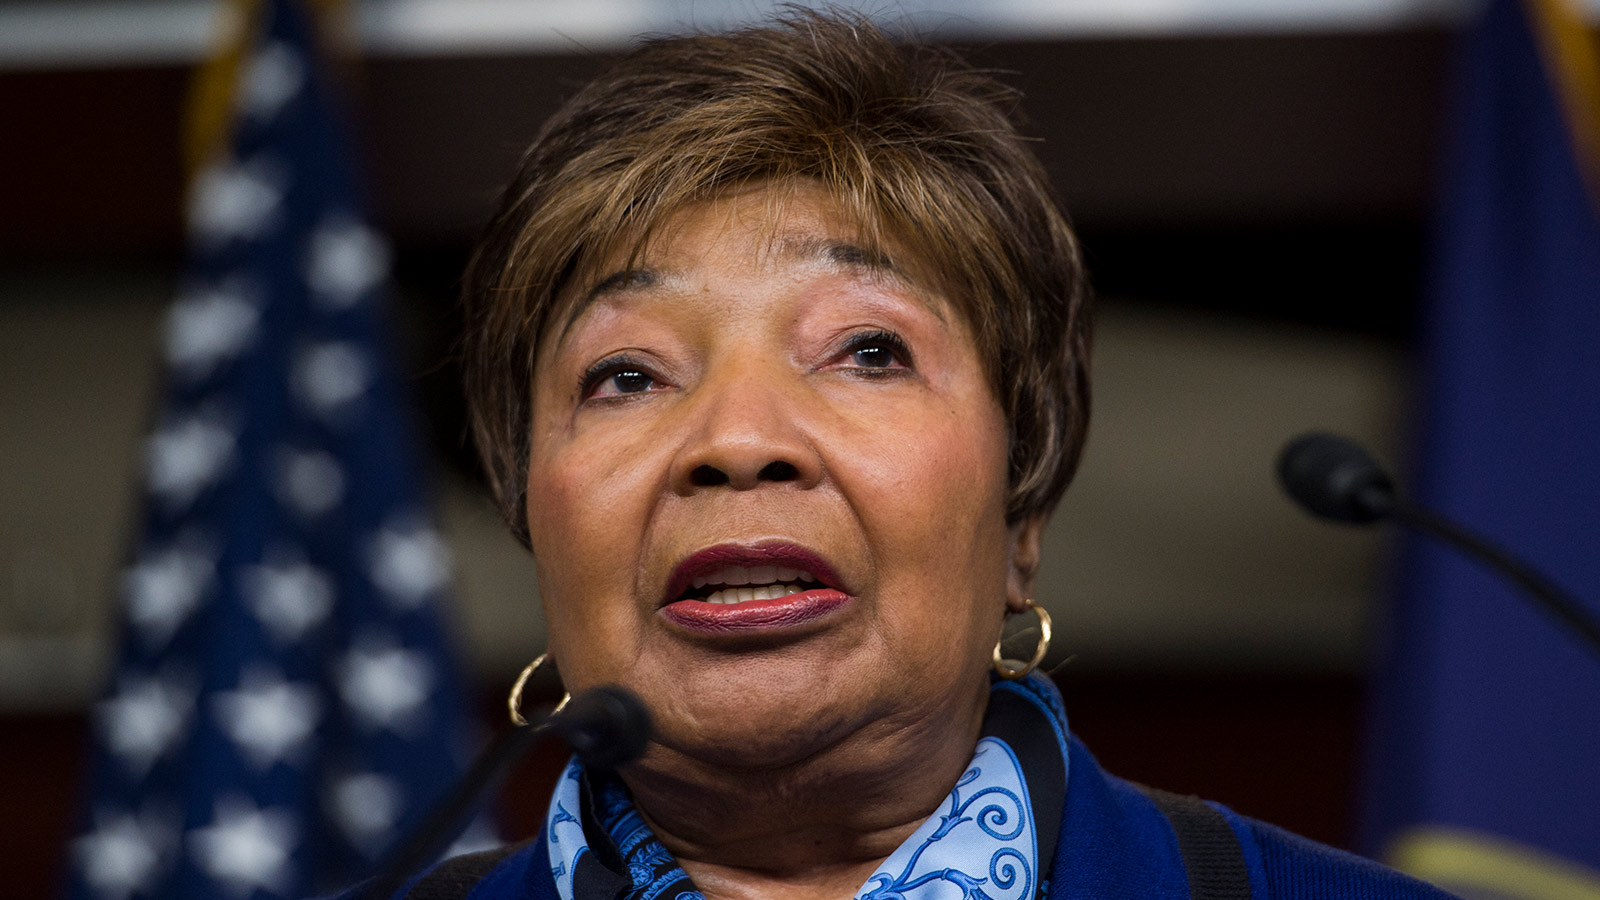 Rep. Eddie Bernice Johnson, D-Texas, participates in the House Democrats' news conference on the Republican budget on Wednesday, April 9, 2014.